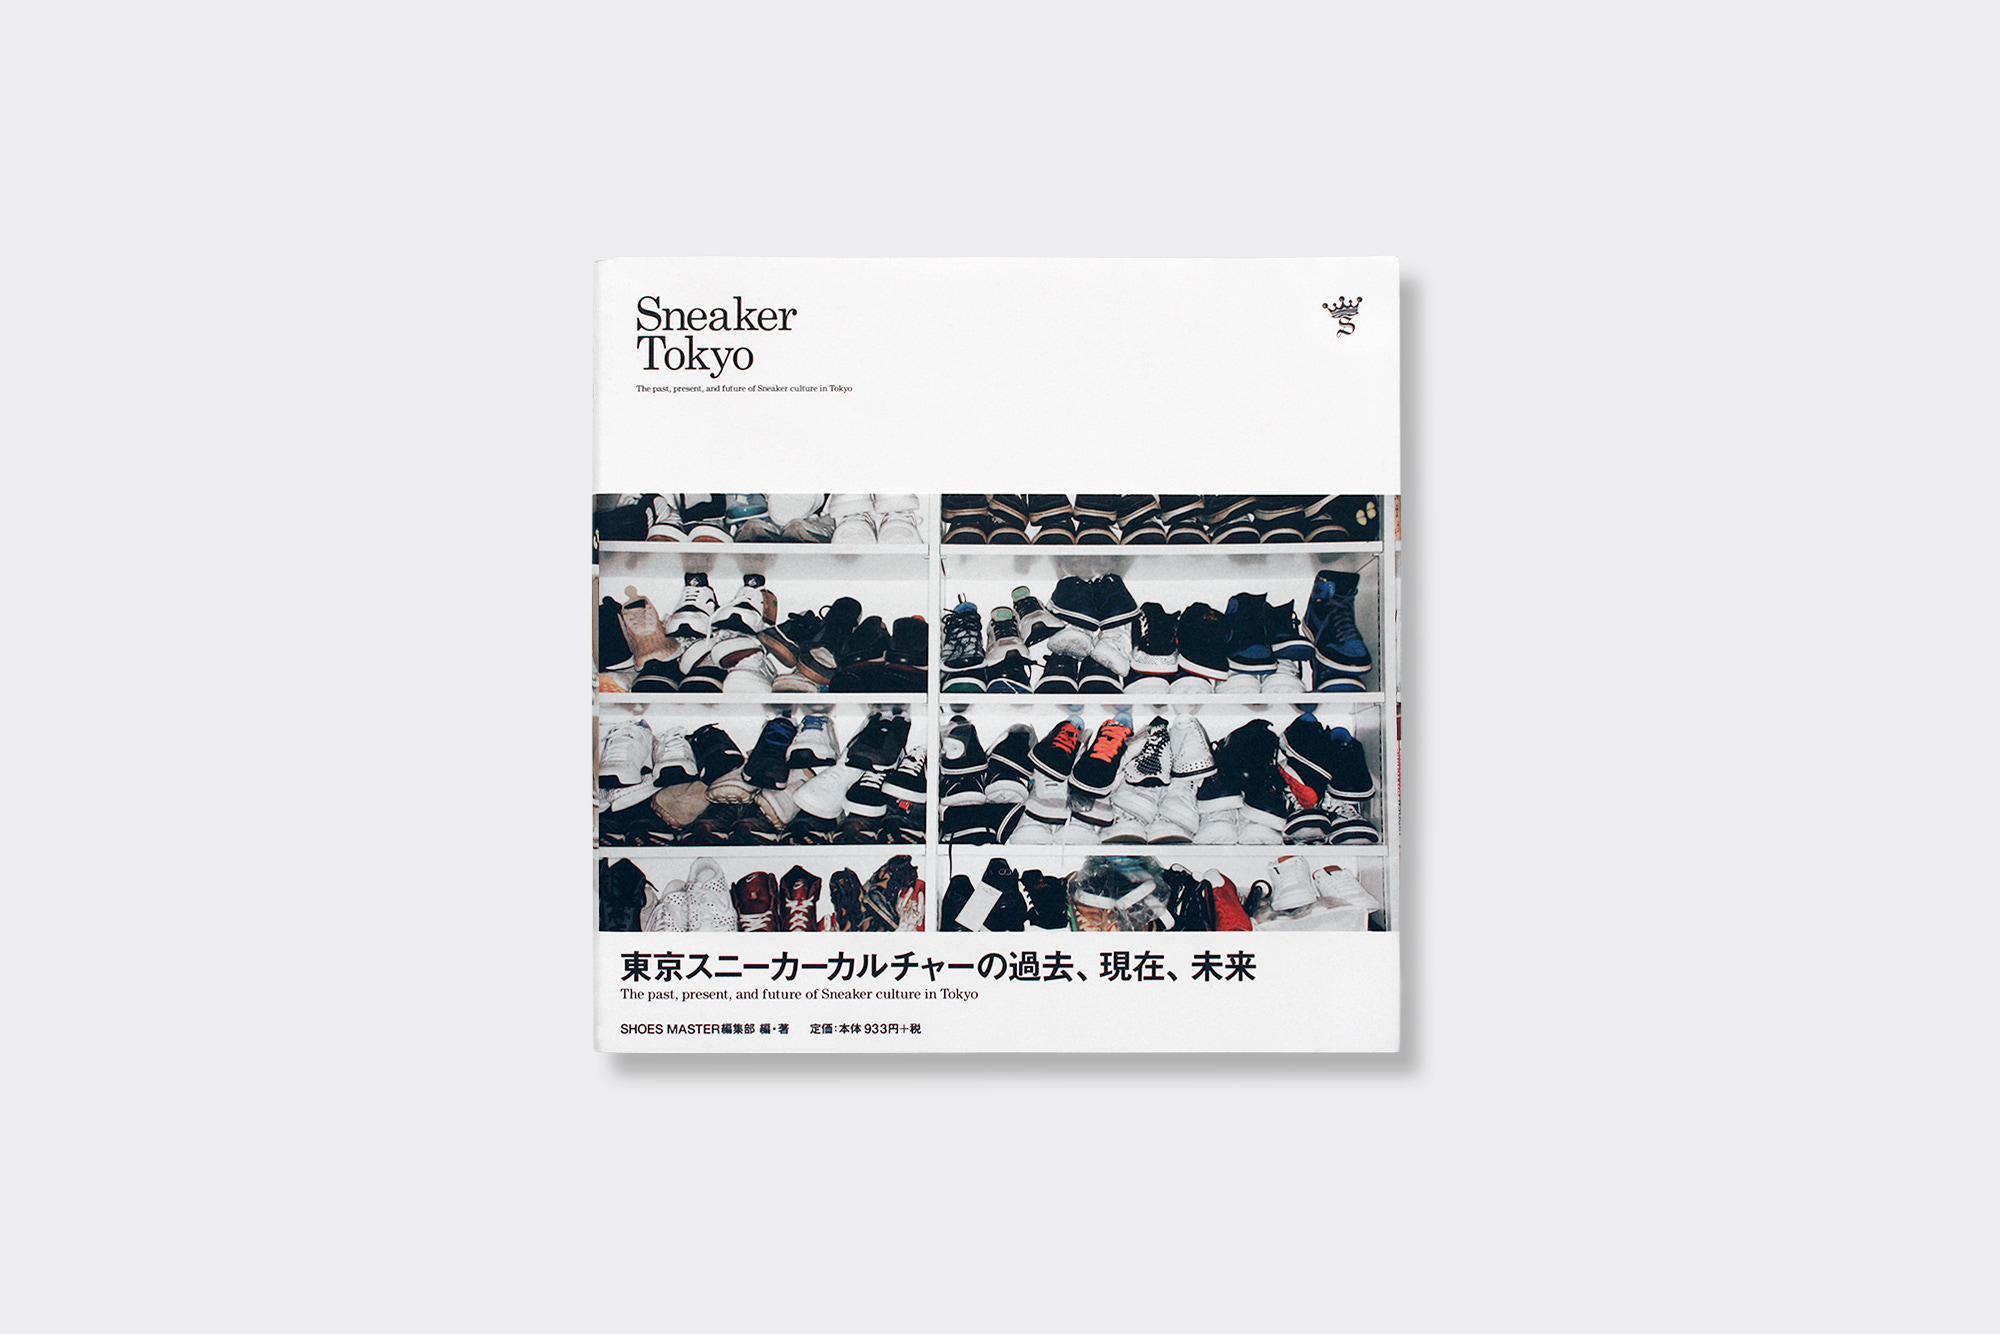 Sneaker Tokyo Vol. 1 - the Past, Present, and Future of Sneaker Culture in Tokyo (2009)